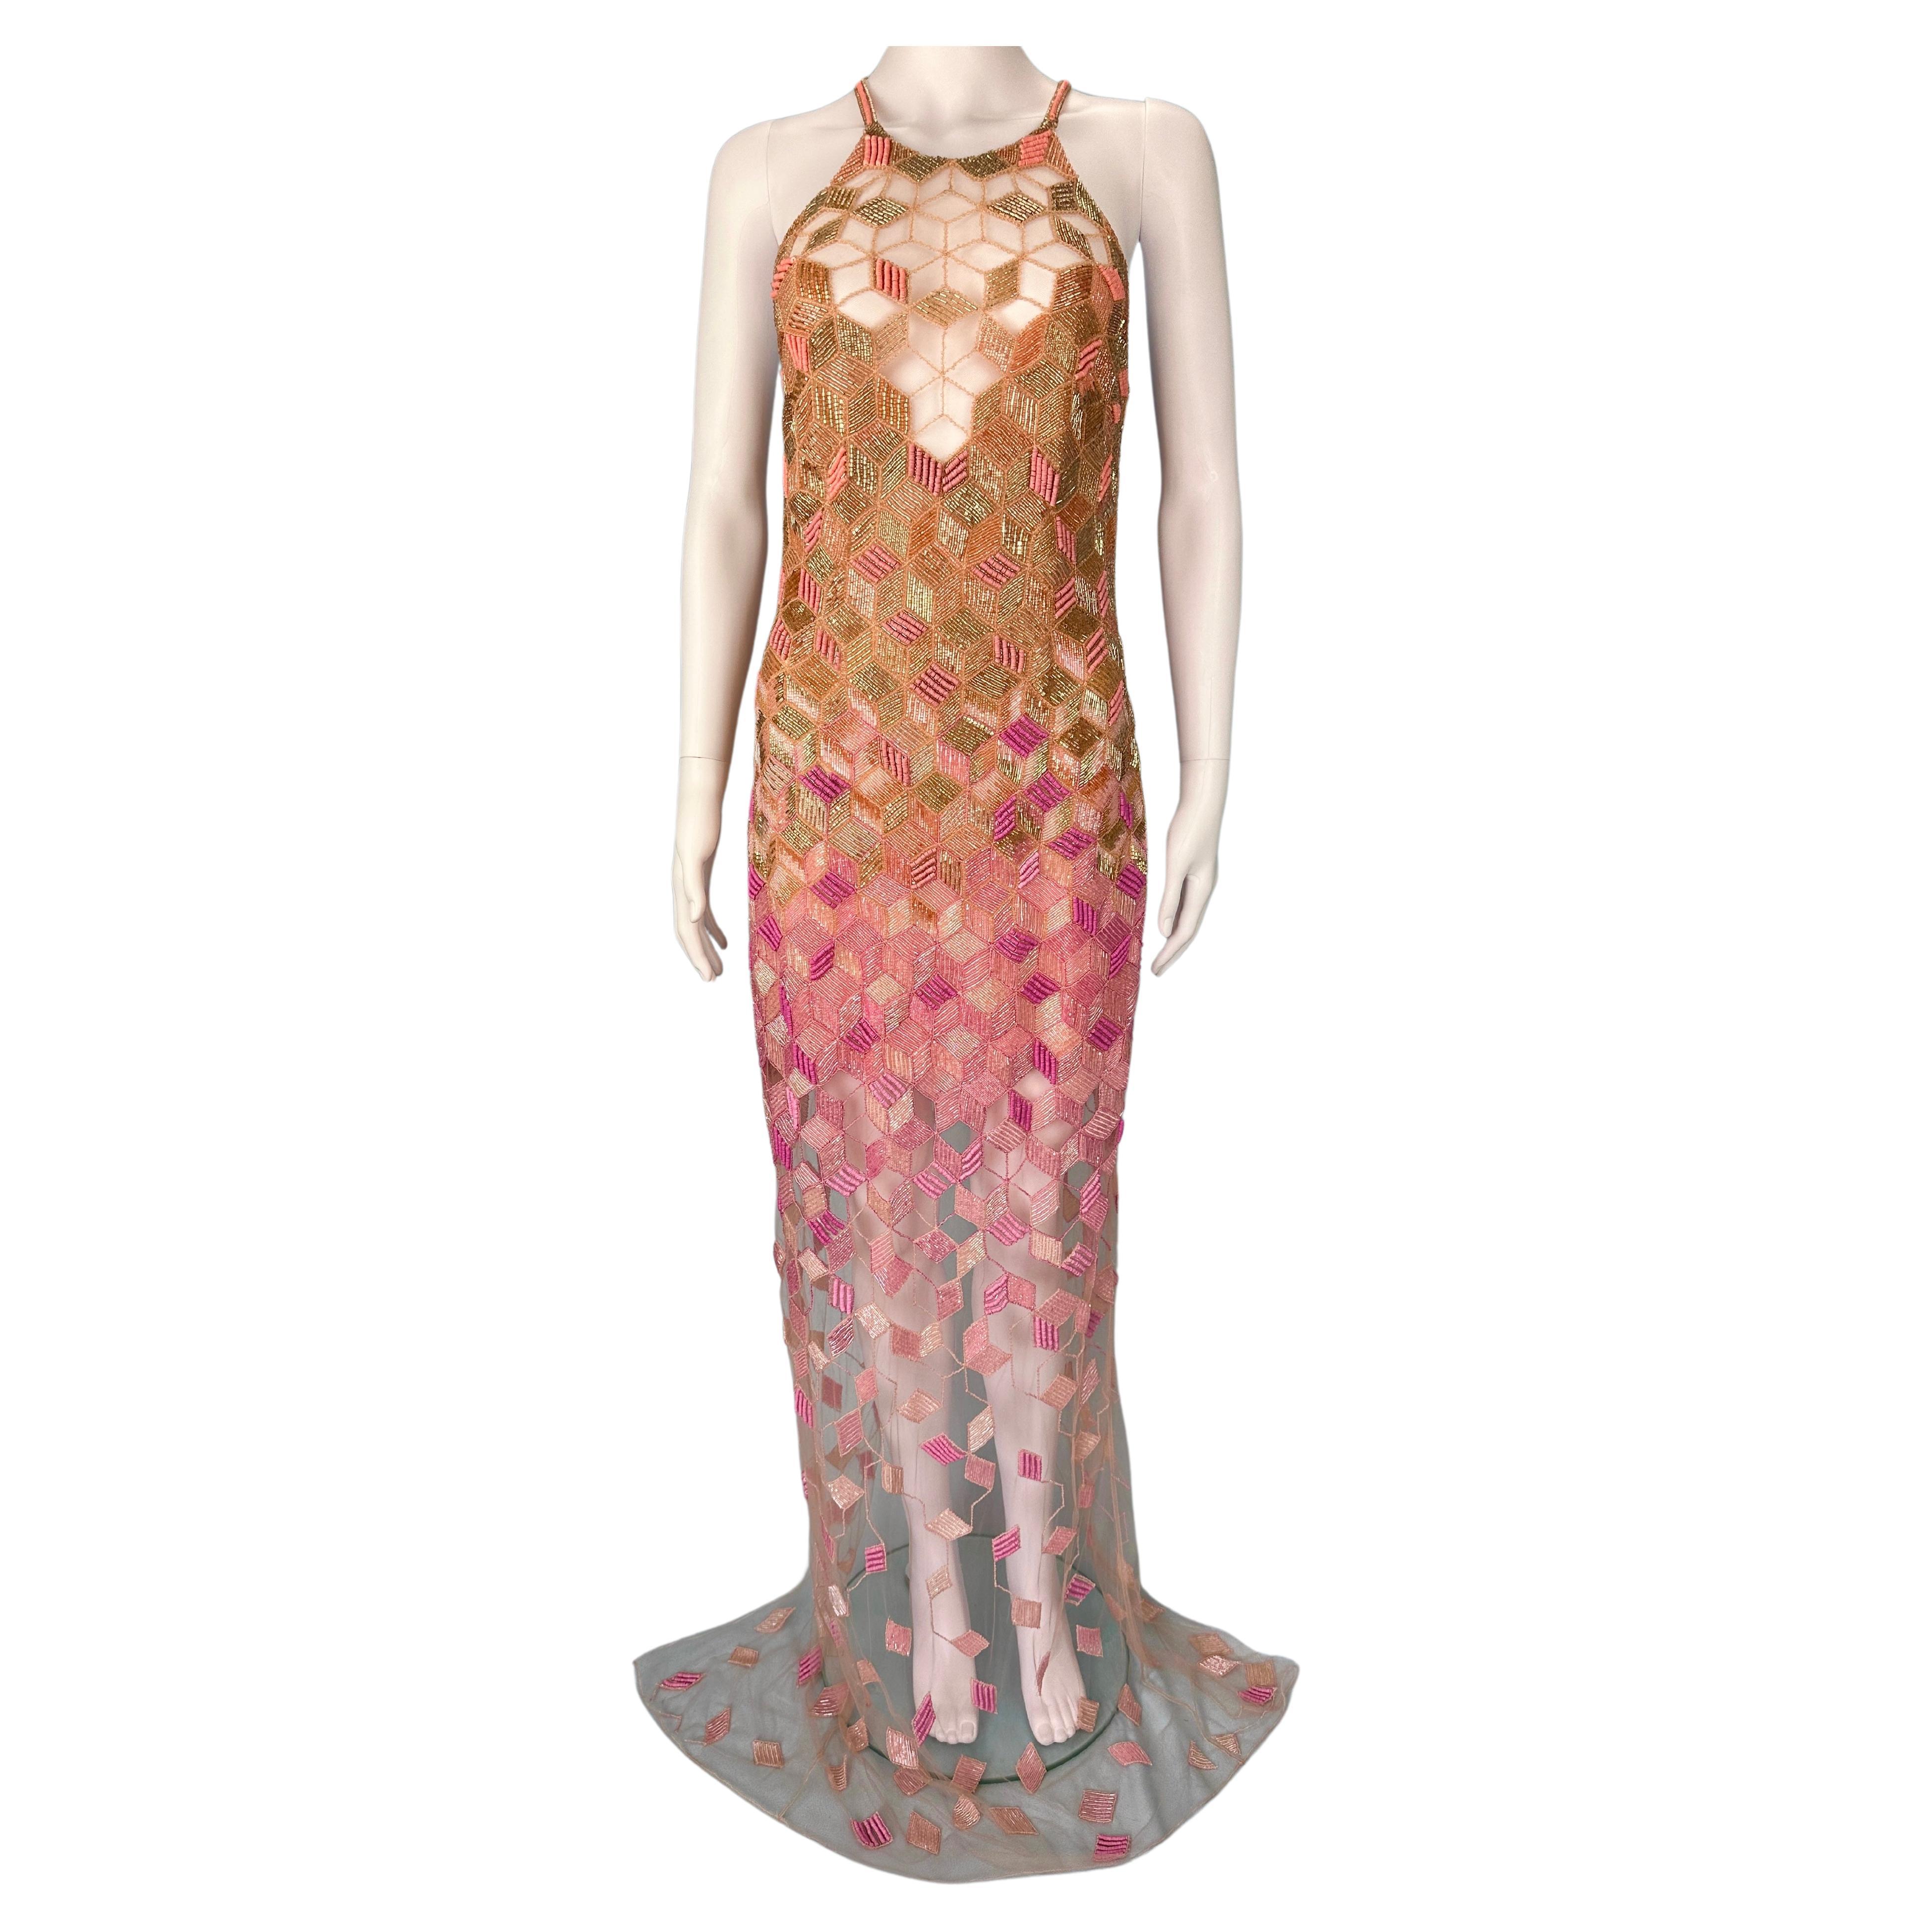 Versace Spring 2015 Beaded Embellished Geometric Pink Gown Dress For Sale